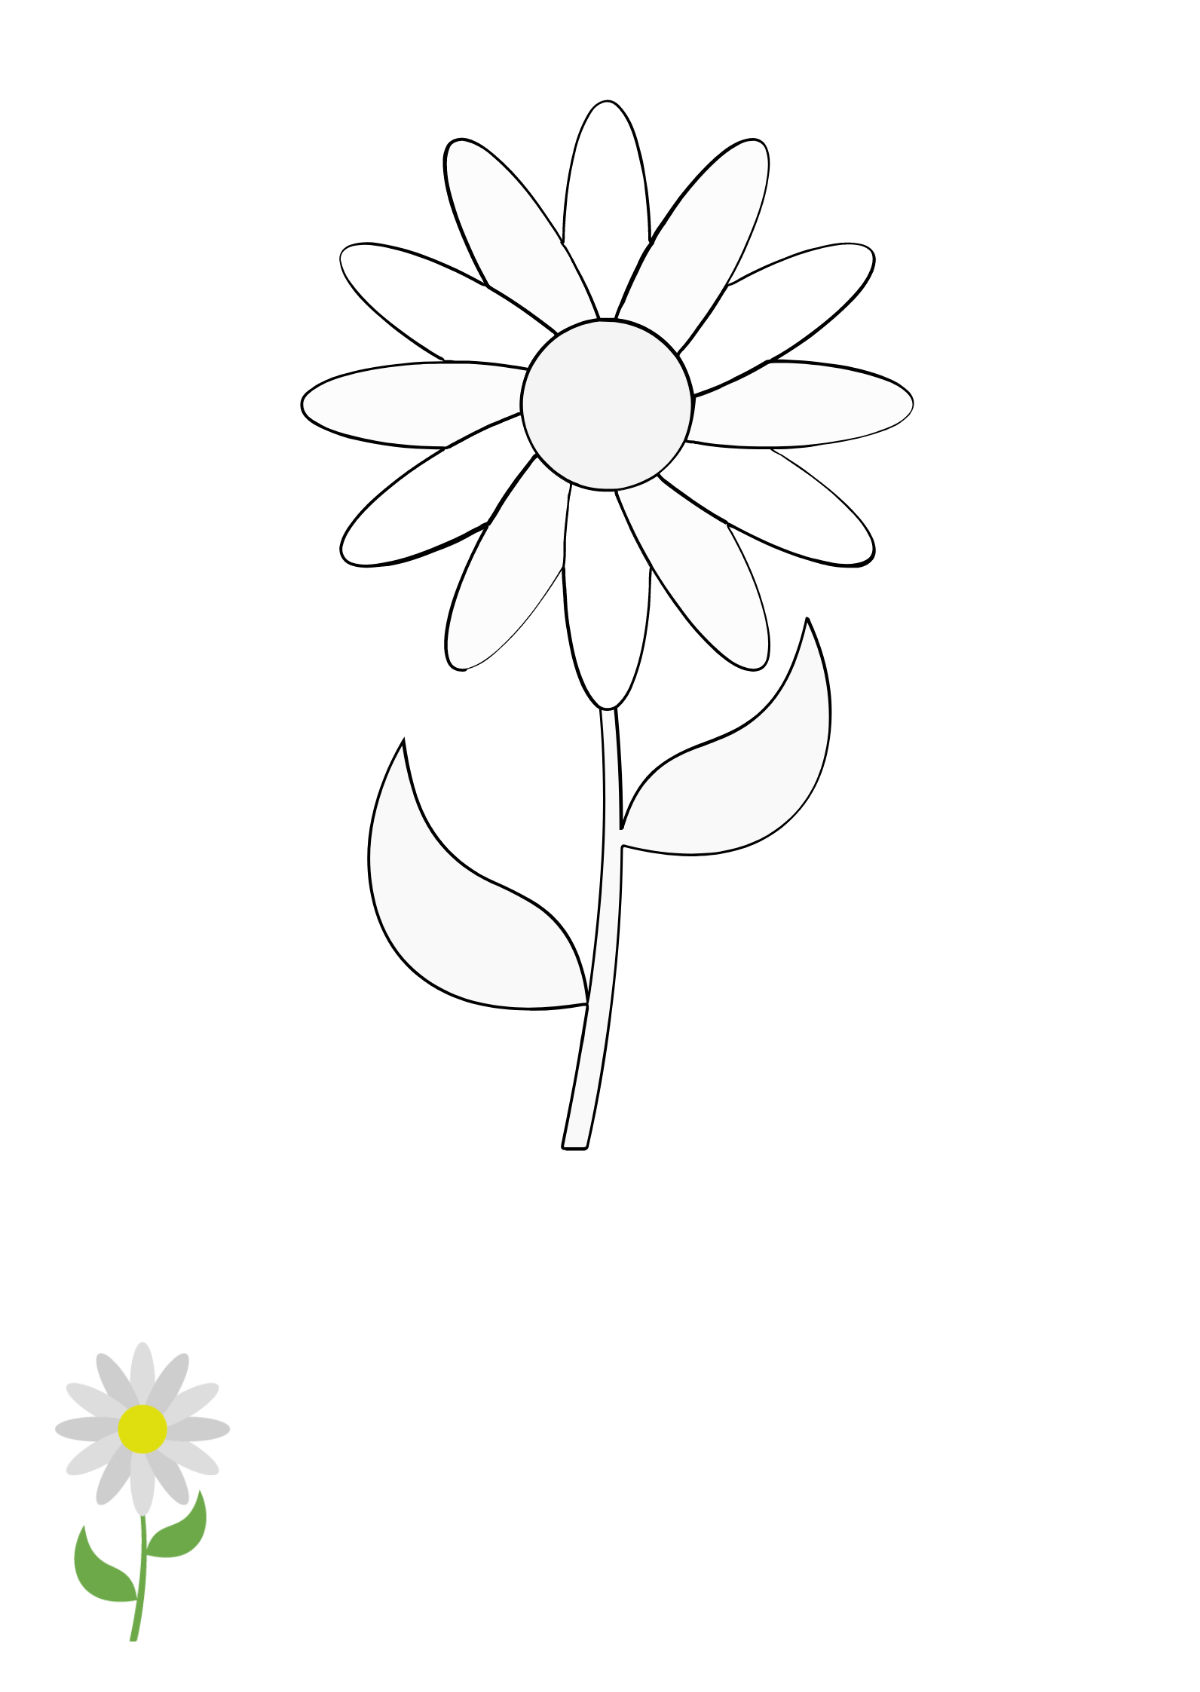 Daisy Flower Coloring Page Template